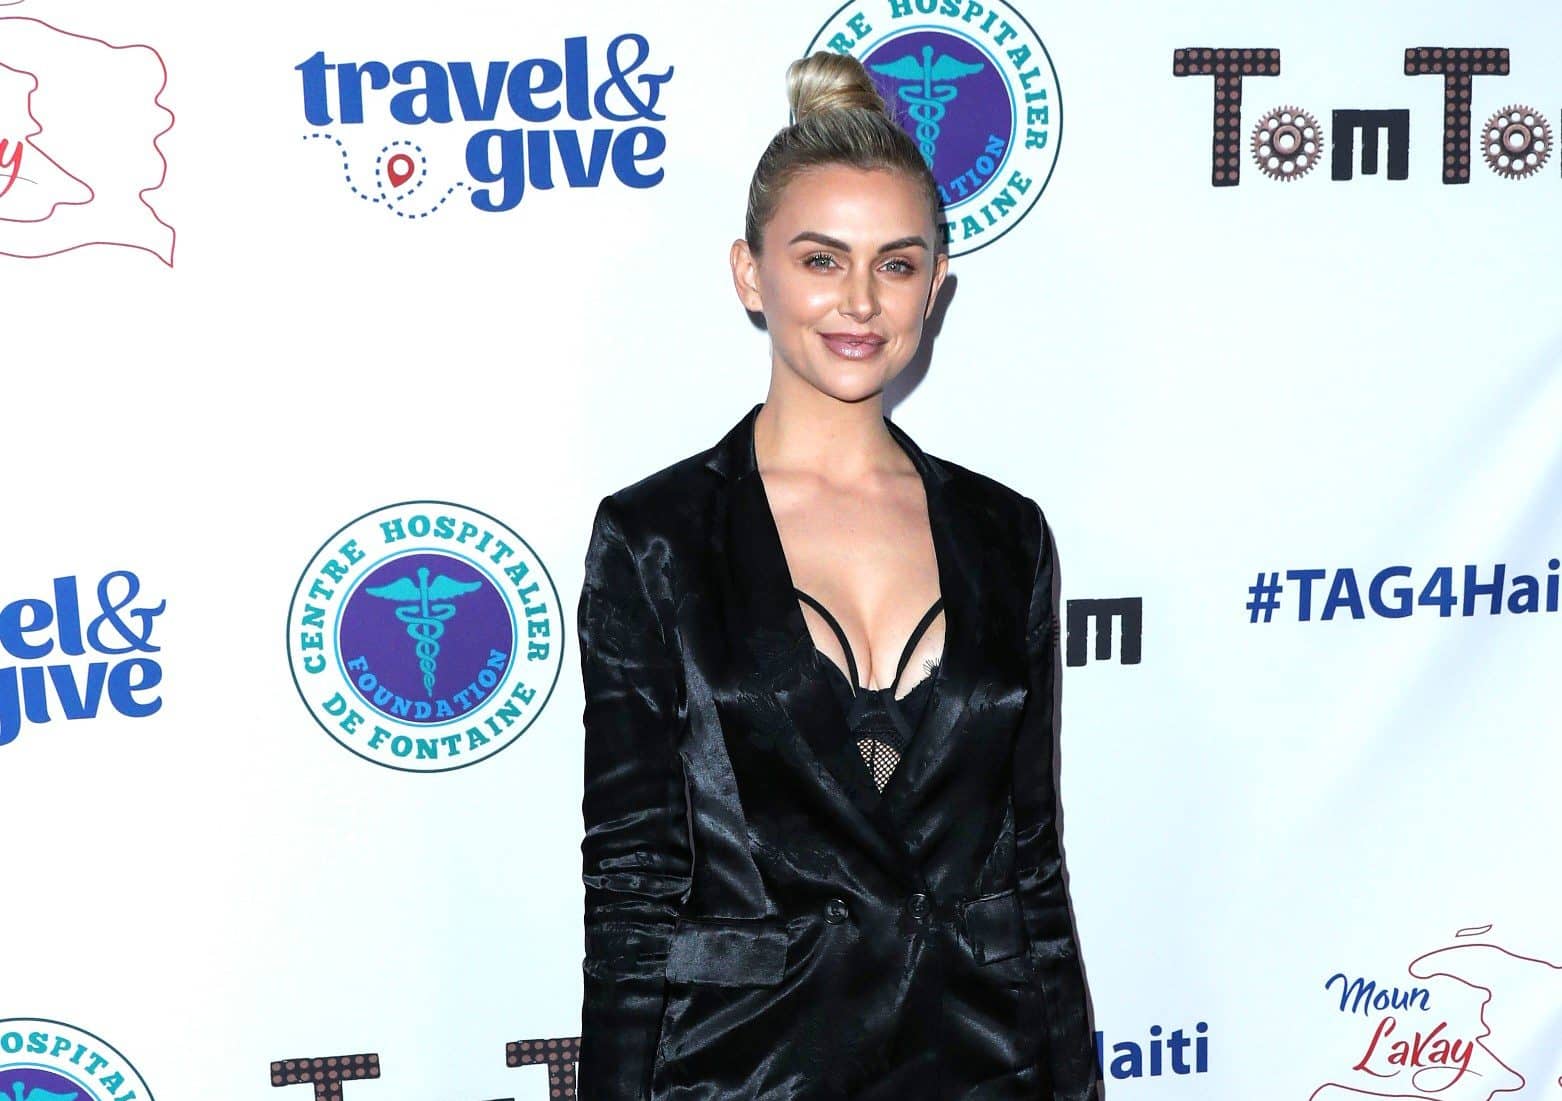 PHOTOS: Lala Kent Celebrates Daughter Ocean's 1st Birthday With Vanderpump Rules Cast, See Little 'Ariel' With the Babies of Lala's Co-Stars